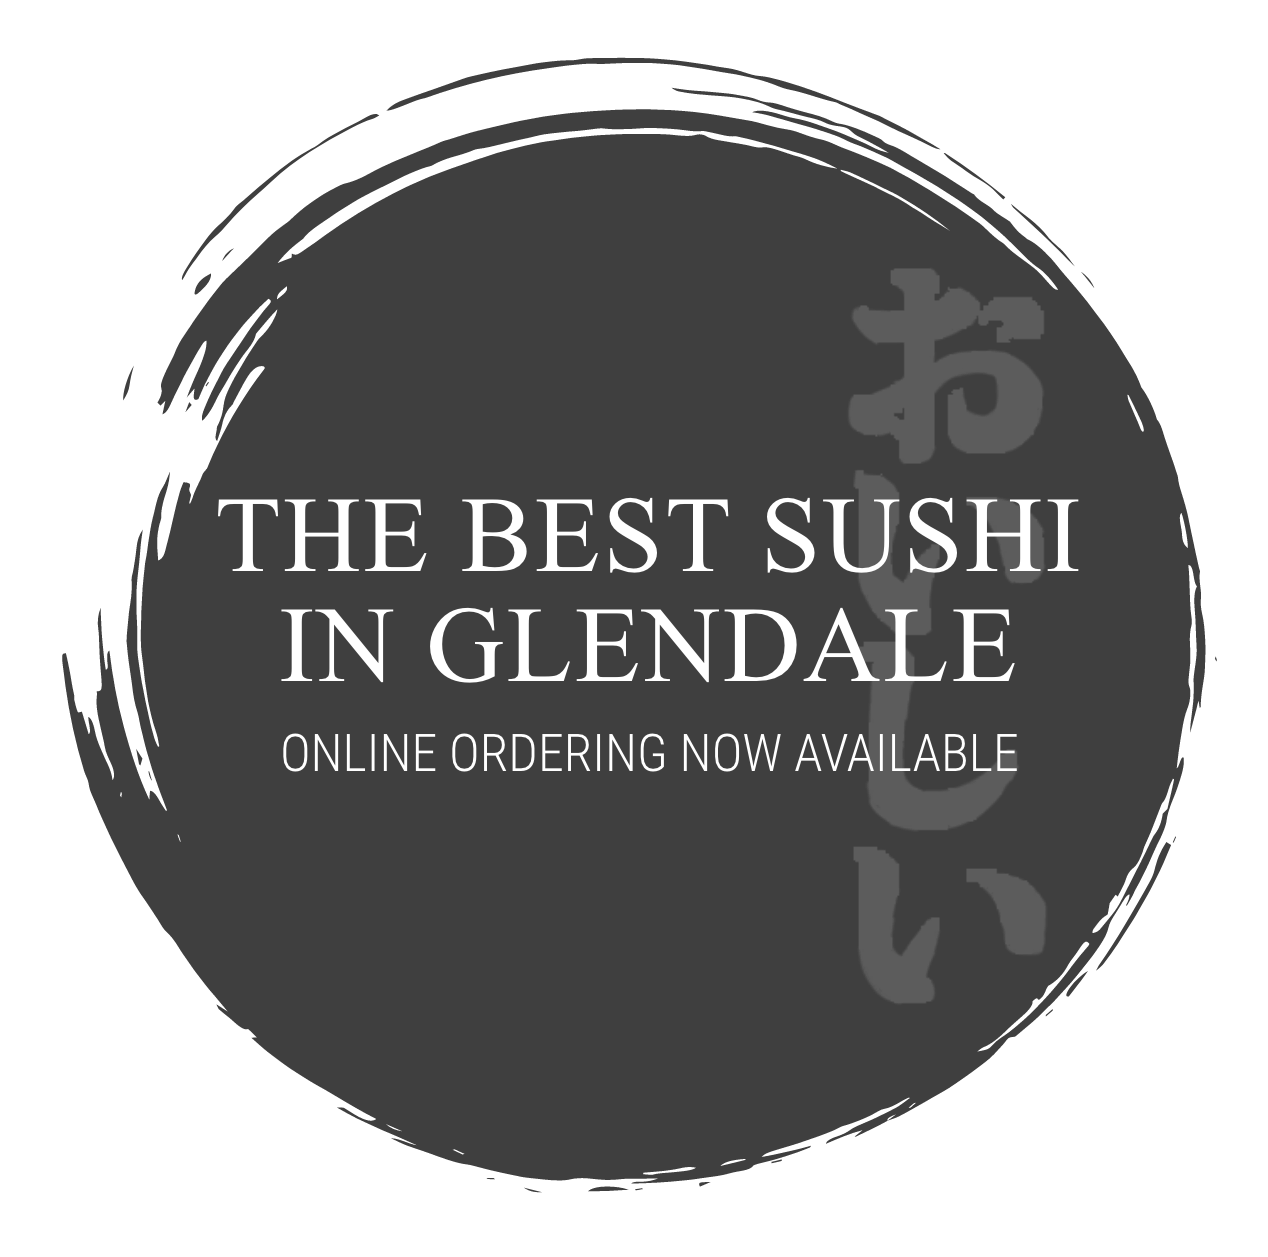 The Best Sushi in Glendale